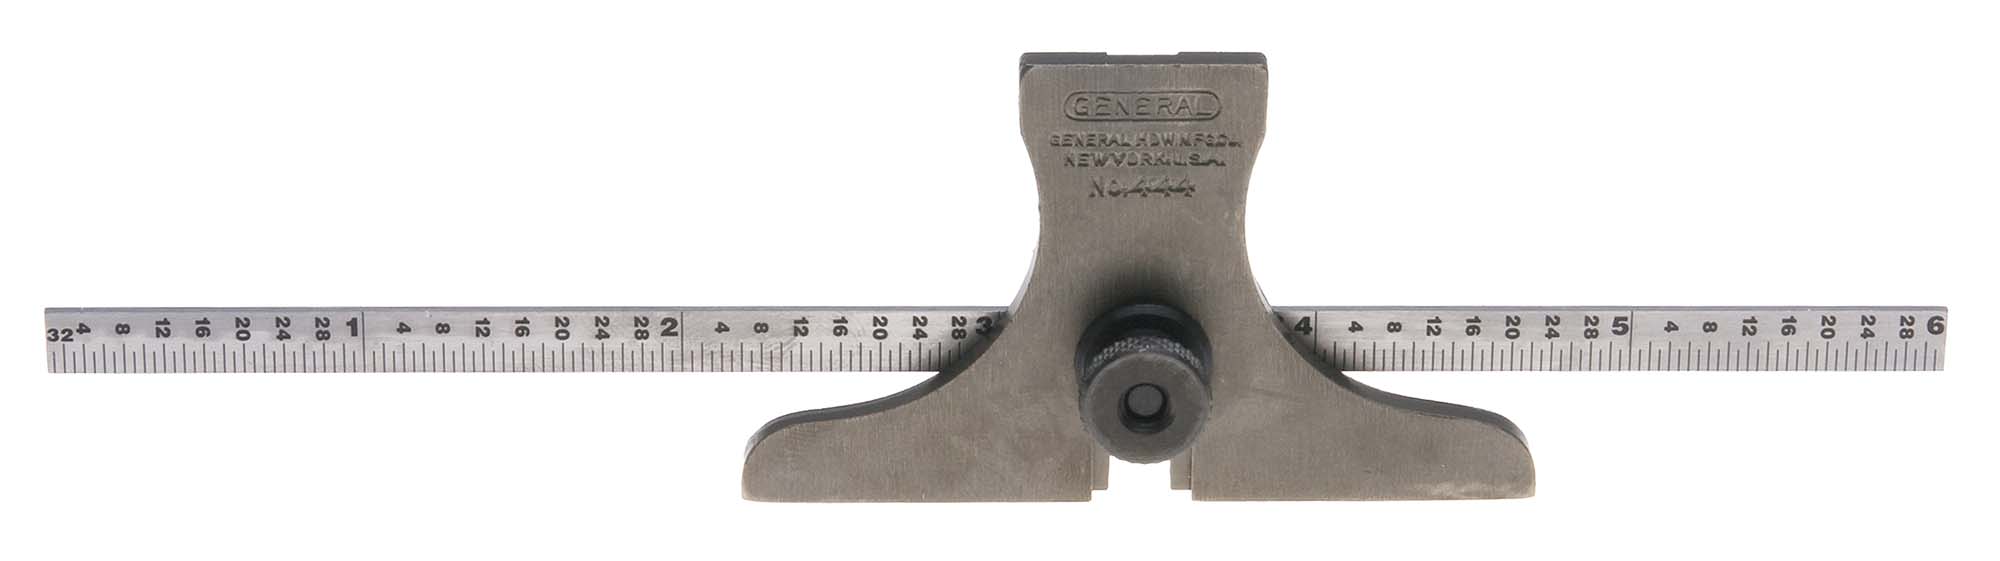 General 444 Depth and Angle Gage